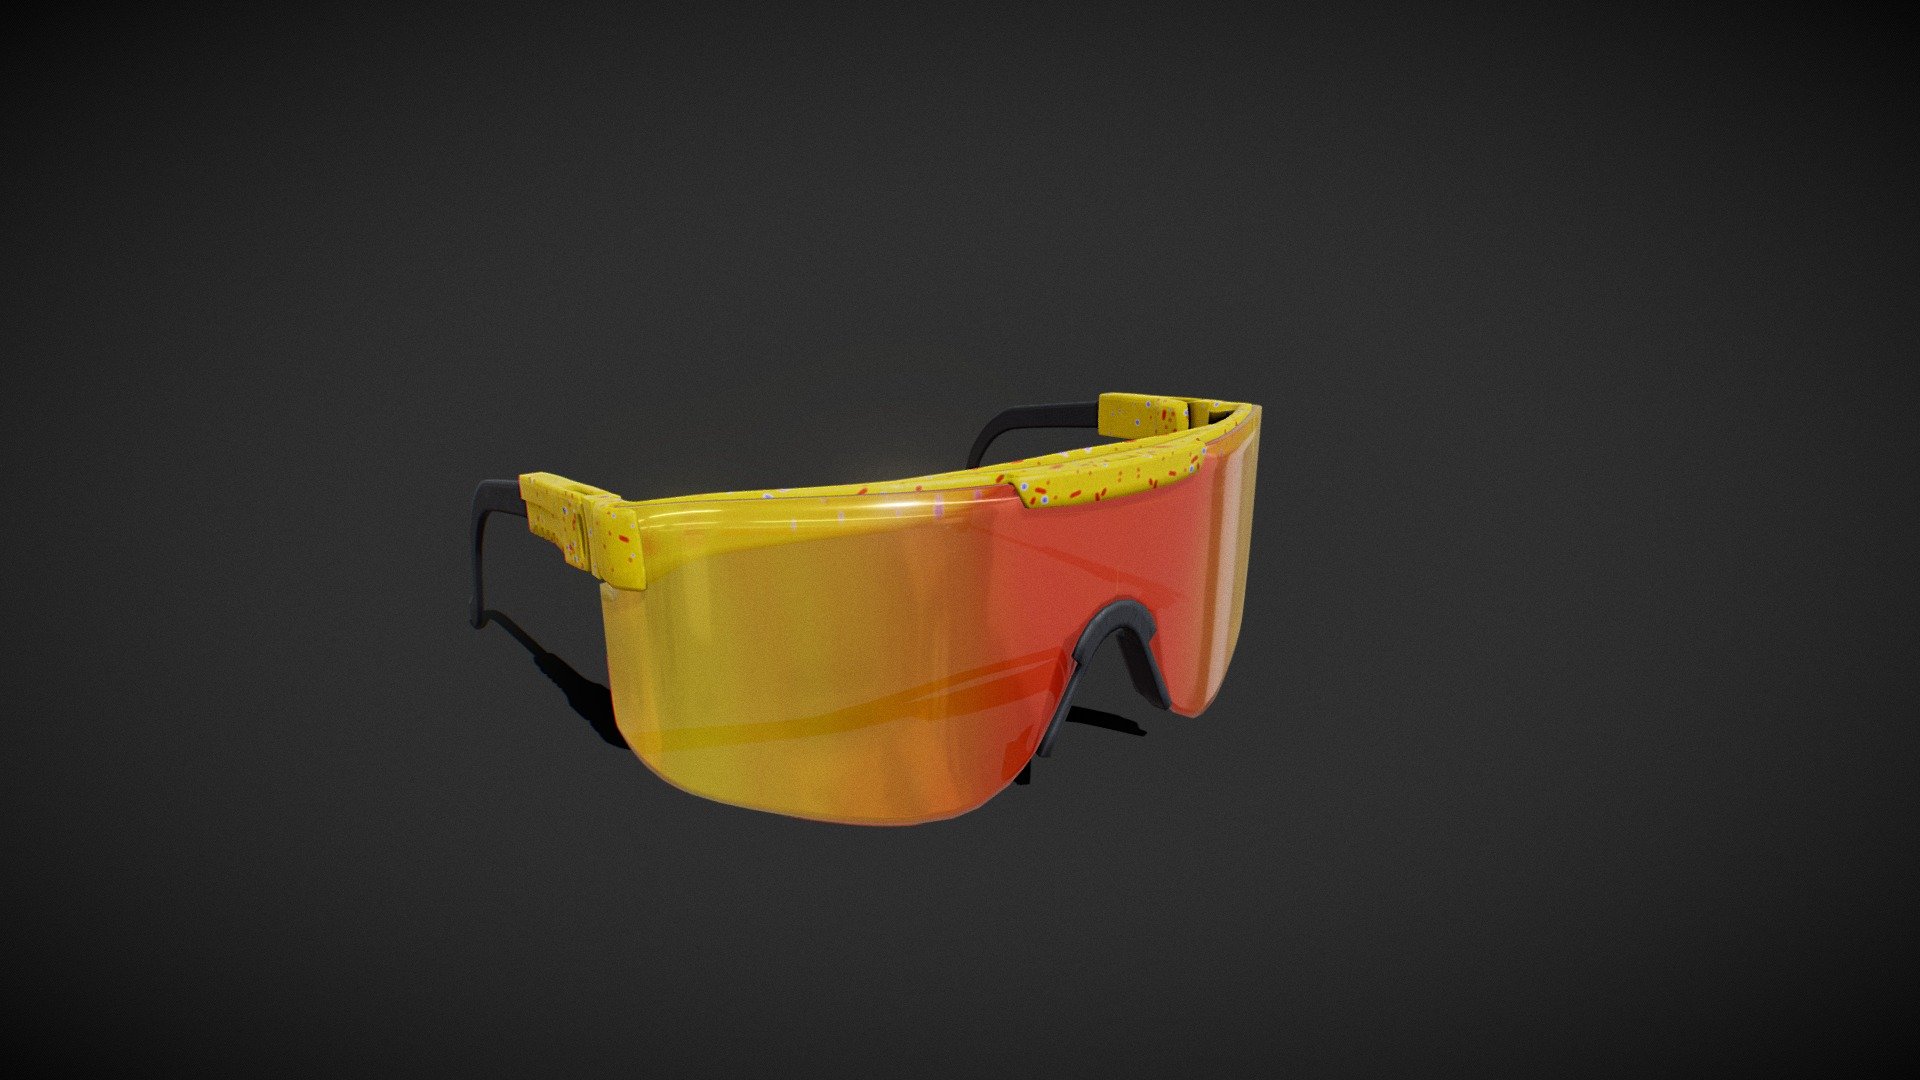 Remastered Drip
now fully textured. 
Low Poly version of these shades - Pit Vipers 
Made for the Drip and Swag Pack on the Unreal Engine Marketplace
You can also get the Glasses variety pack - Eyewear Variety Pack - Vipers 1993 - Low Poly Polarized Shades - Buy Royalty Free 3D model by Isaack - Tacko The 3D Guy (@isaackgamma) 3d model